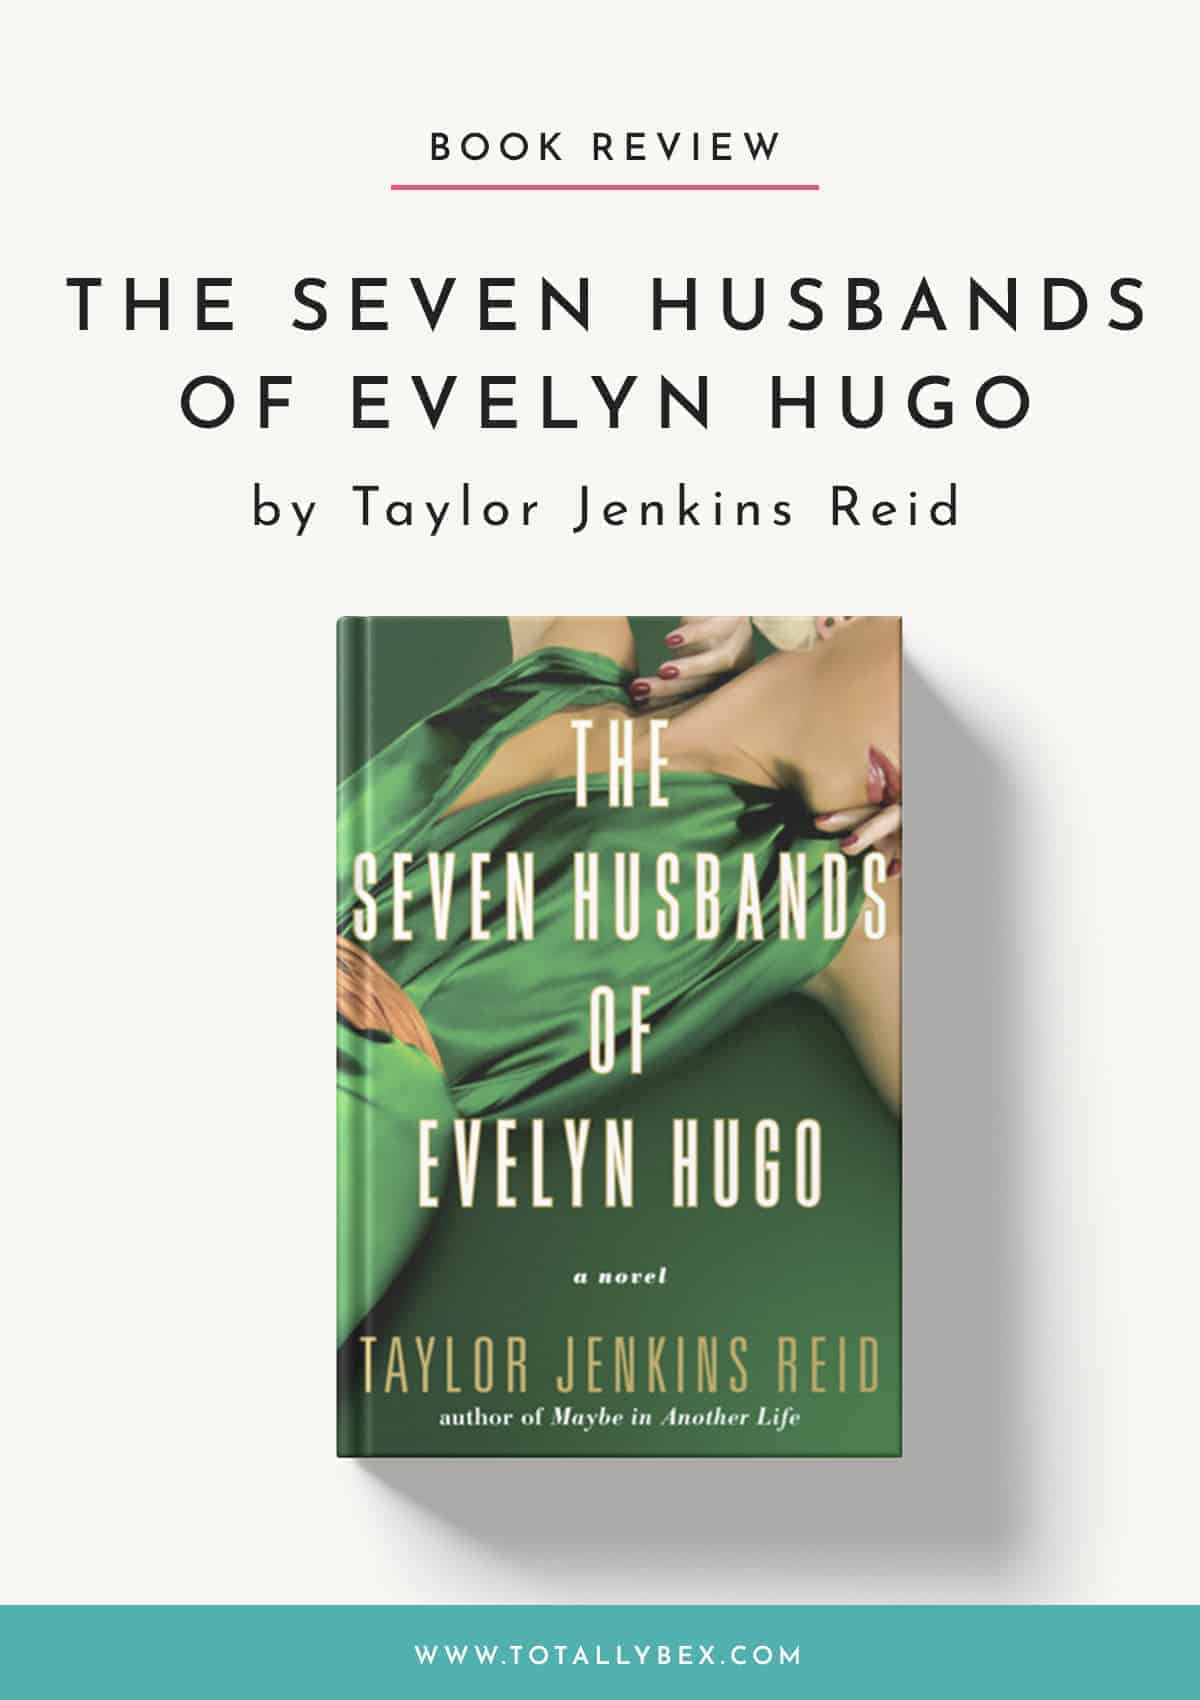 The Seven Husbands of Evelyn Hugo by Taylor Jenkins Reid-Book Review